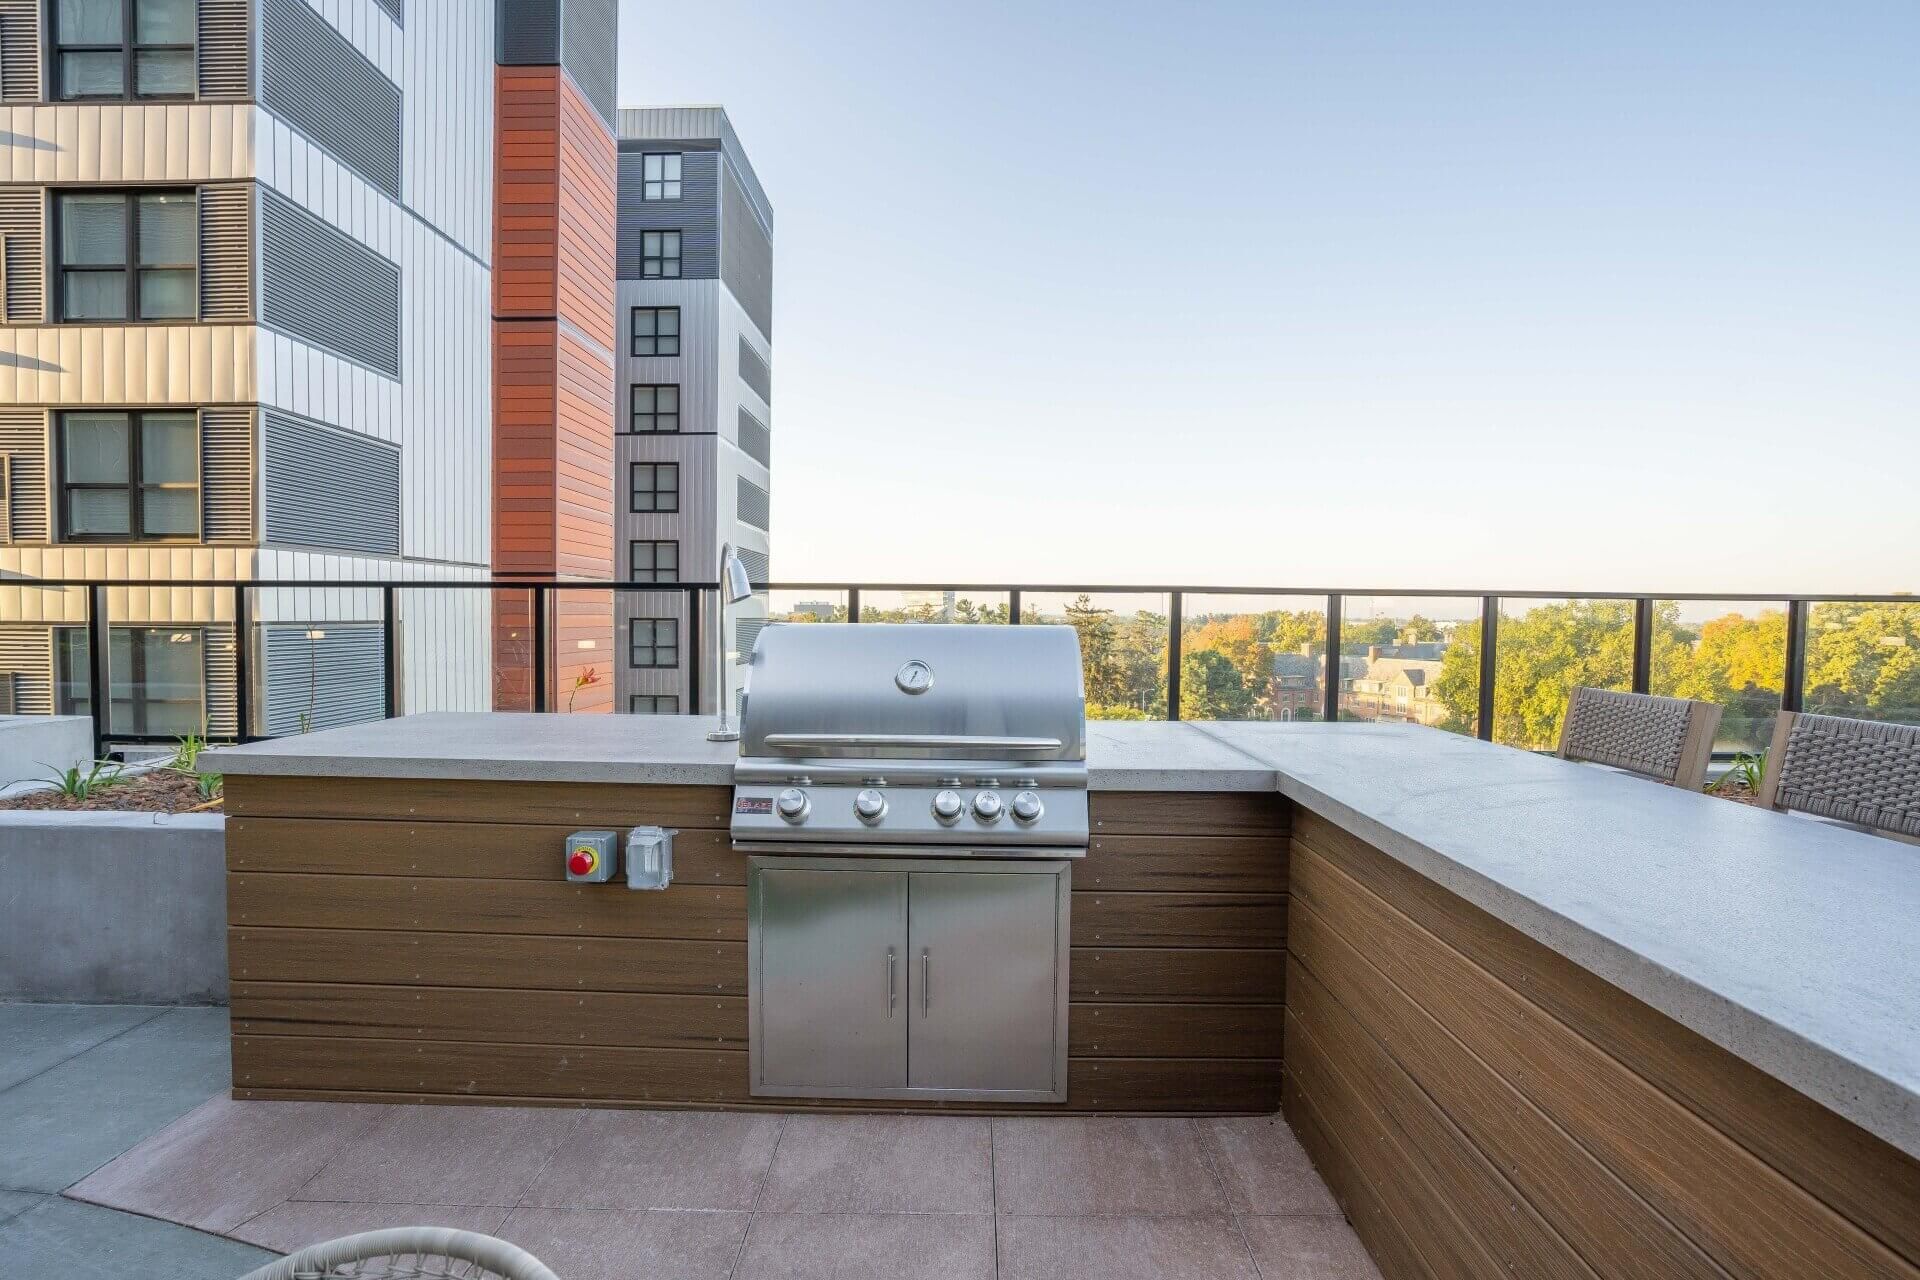 Newman Lofts Outdoor Grilling Station.